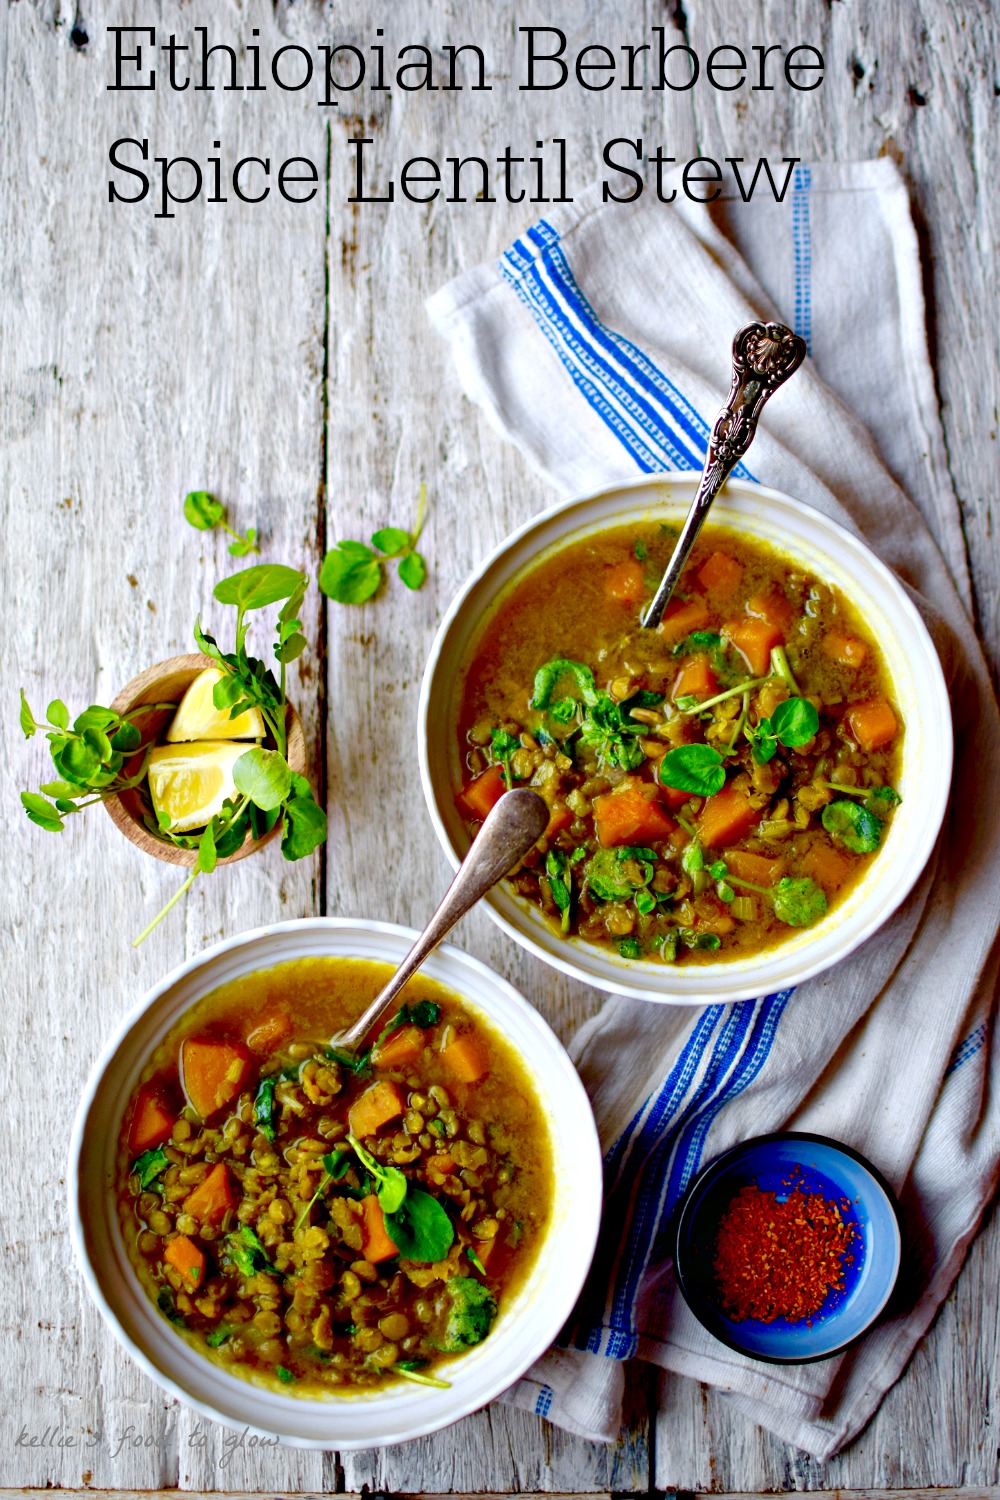 Warm exotic spices and hearty split peas makes for a comforting bowl of deeply flavoured stew. It lasts and gets better over a few days, so make enough to have leftovers, serving with traditional Ethiopian flatbreads, pitta bread, chapati or brown rice. You won't miss the meat.